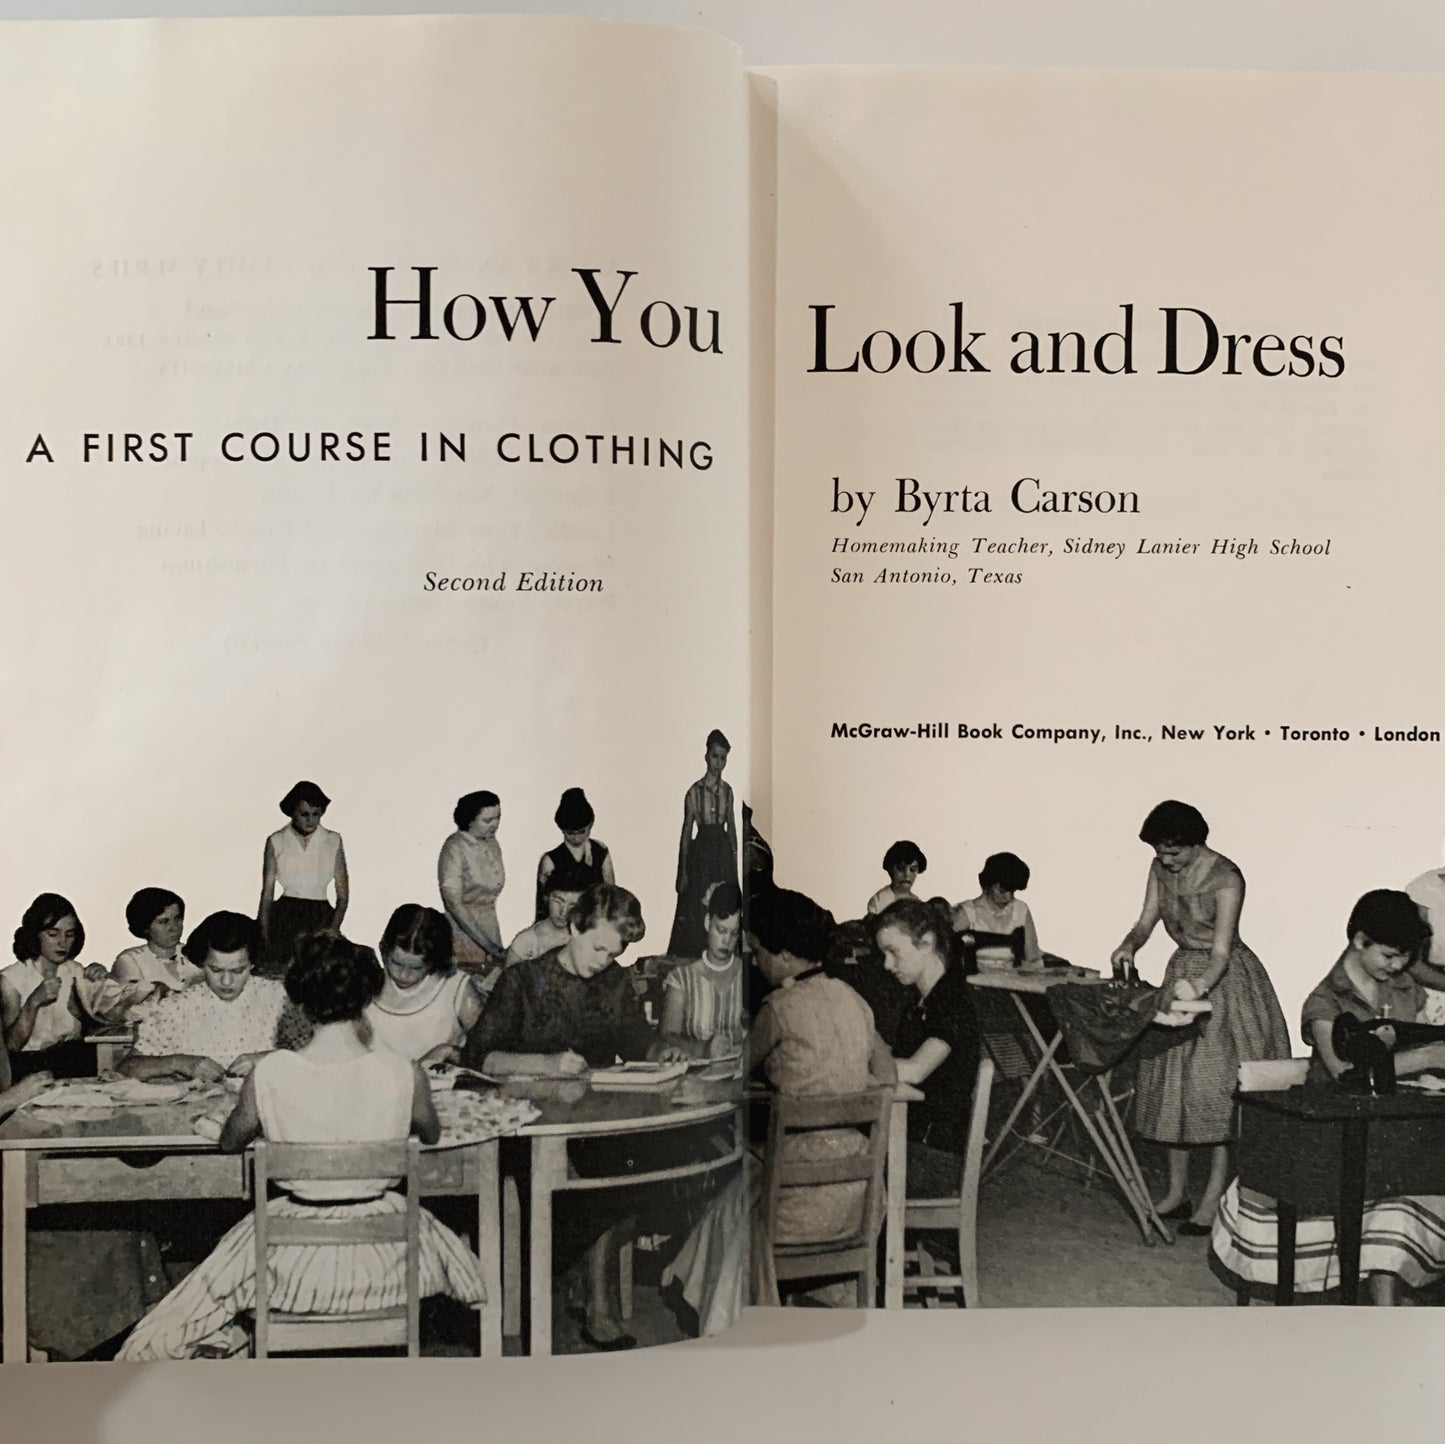 How You Look and Dress: A First Course in Clothing, Home Ec. Textbooks, 1955